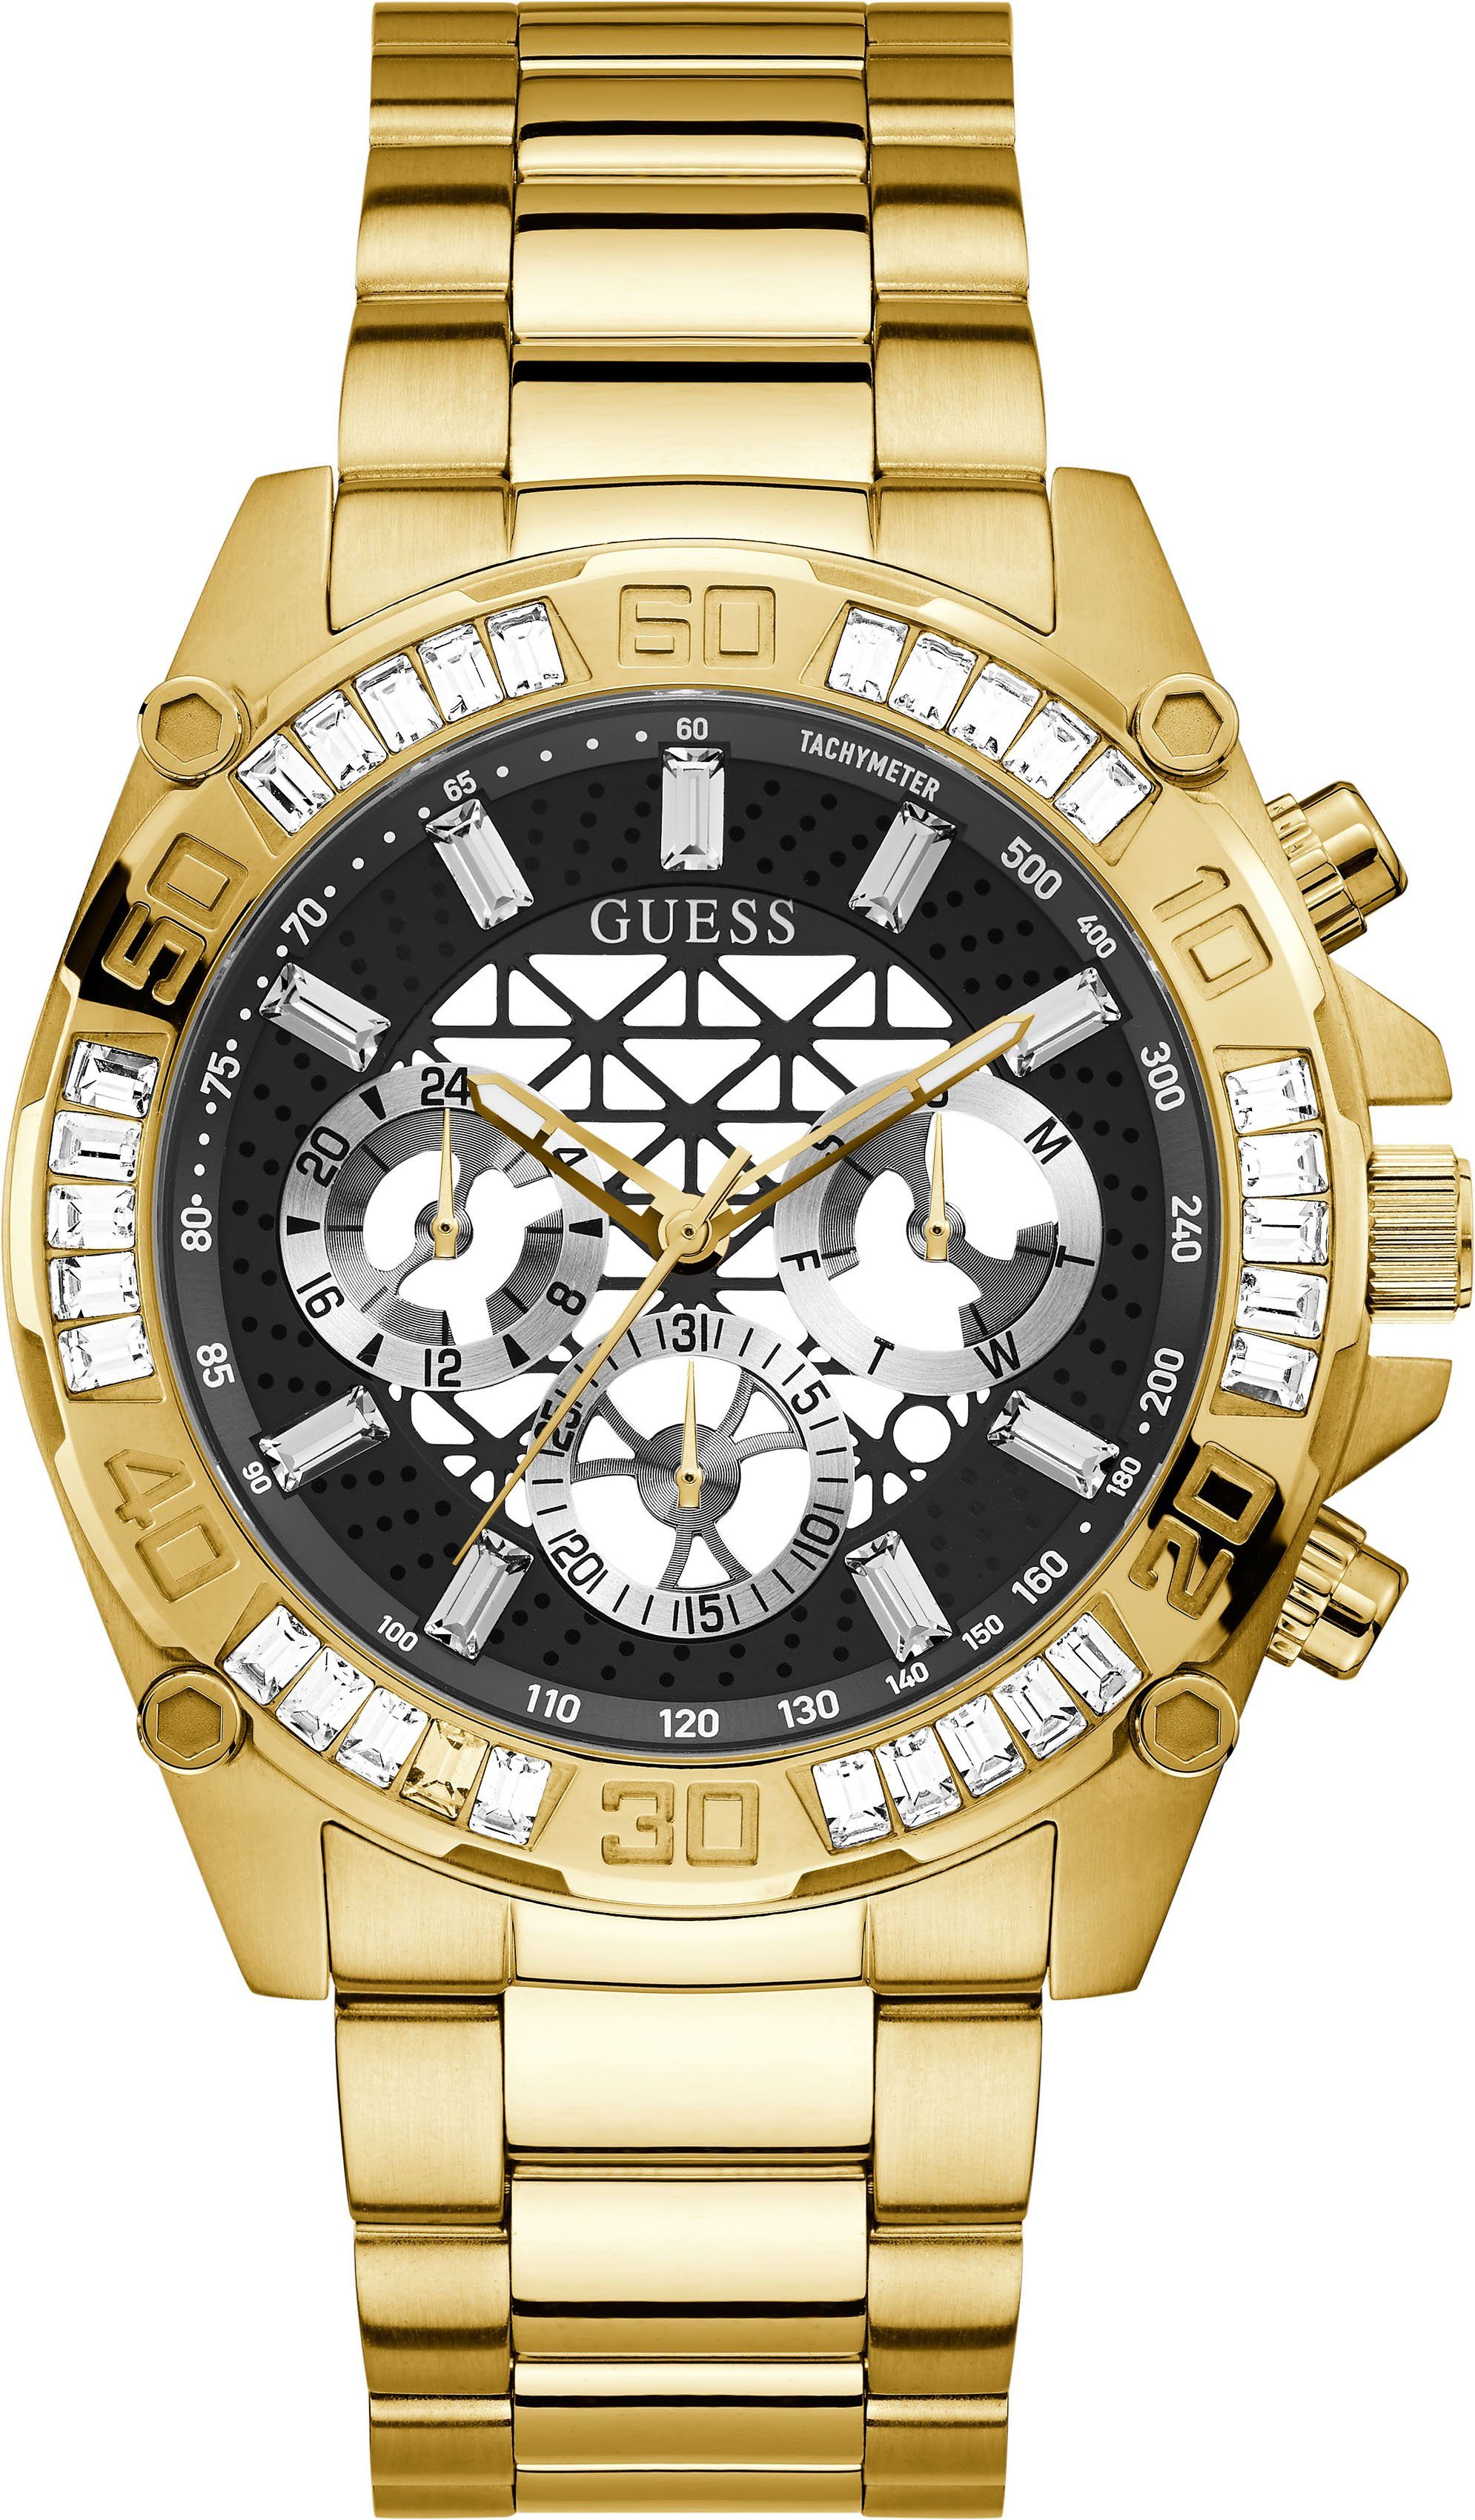 Multifunktionsuhr Guess TROPHY, GW0390G2